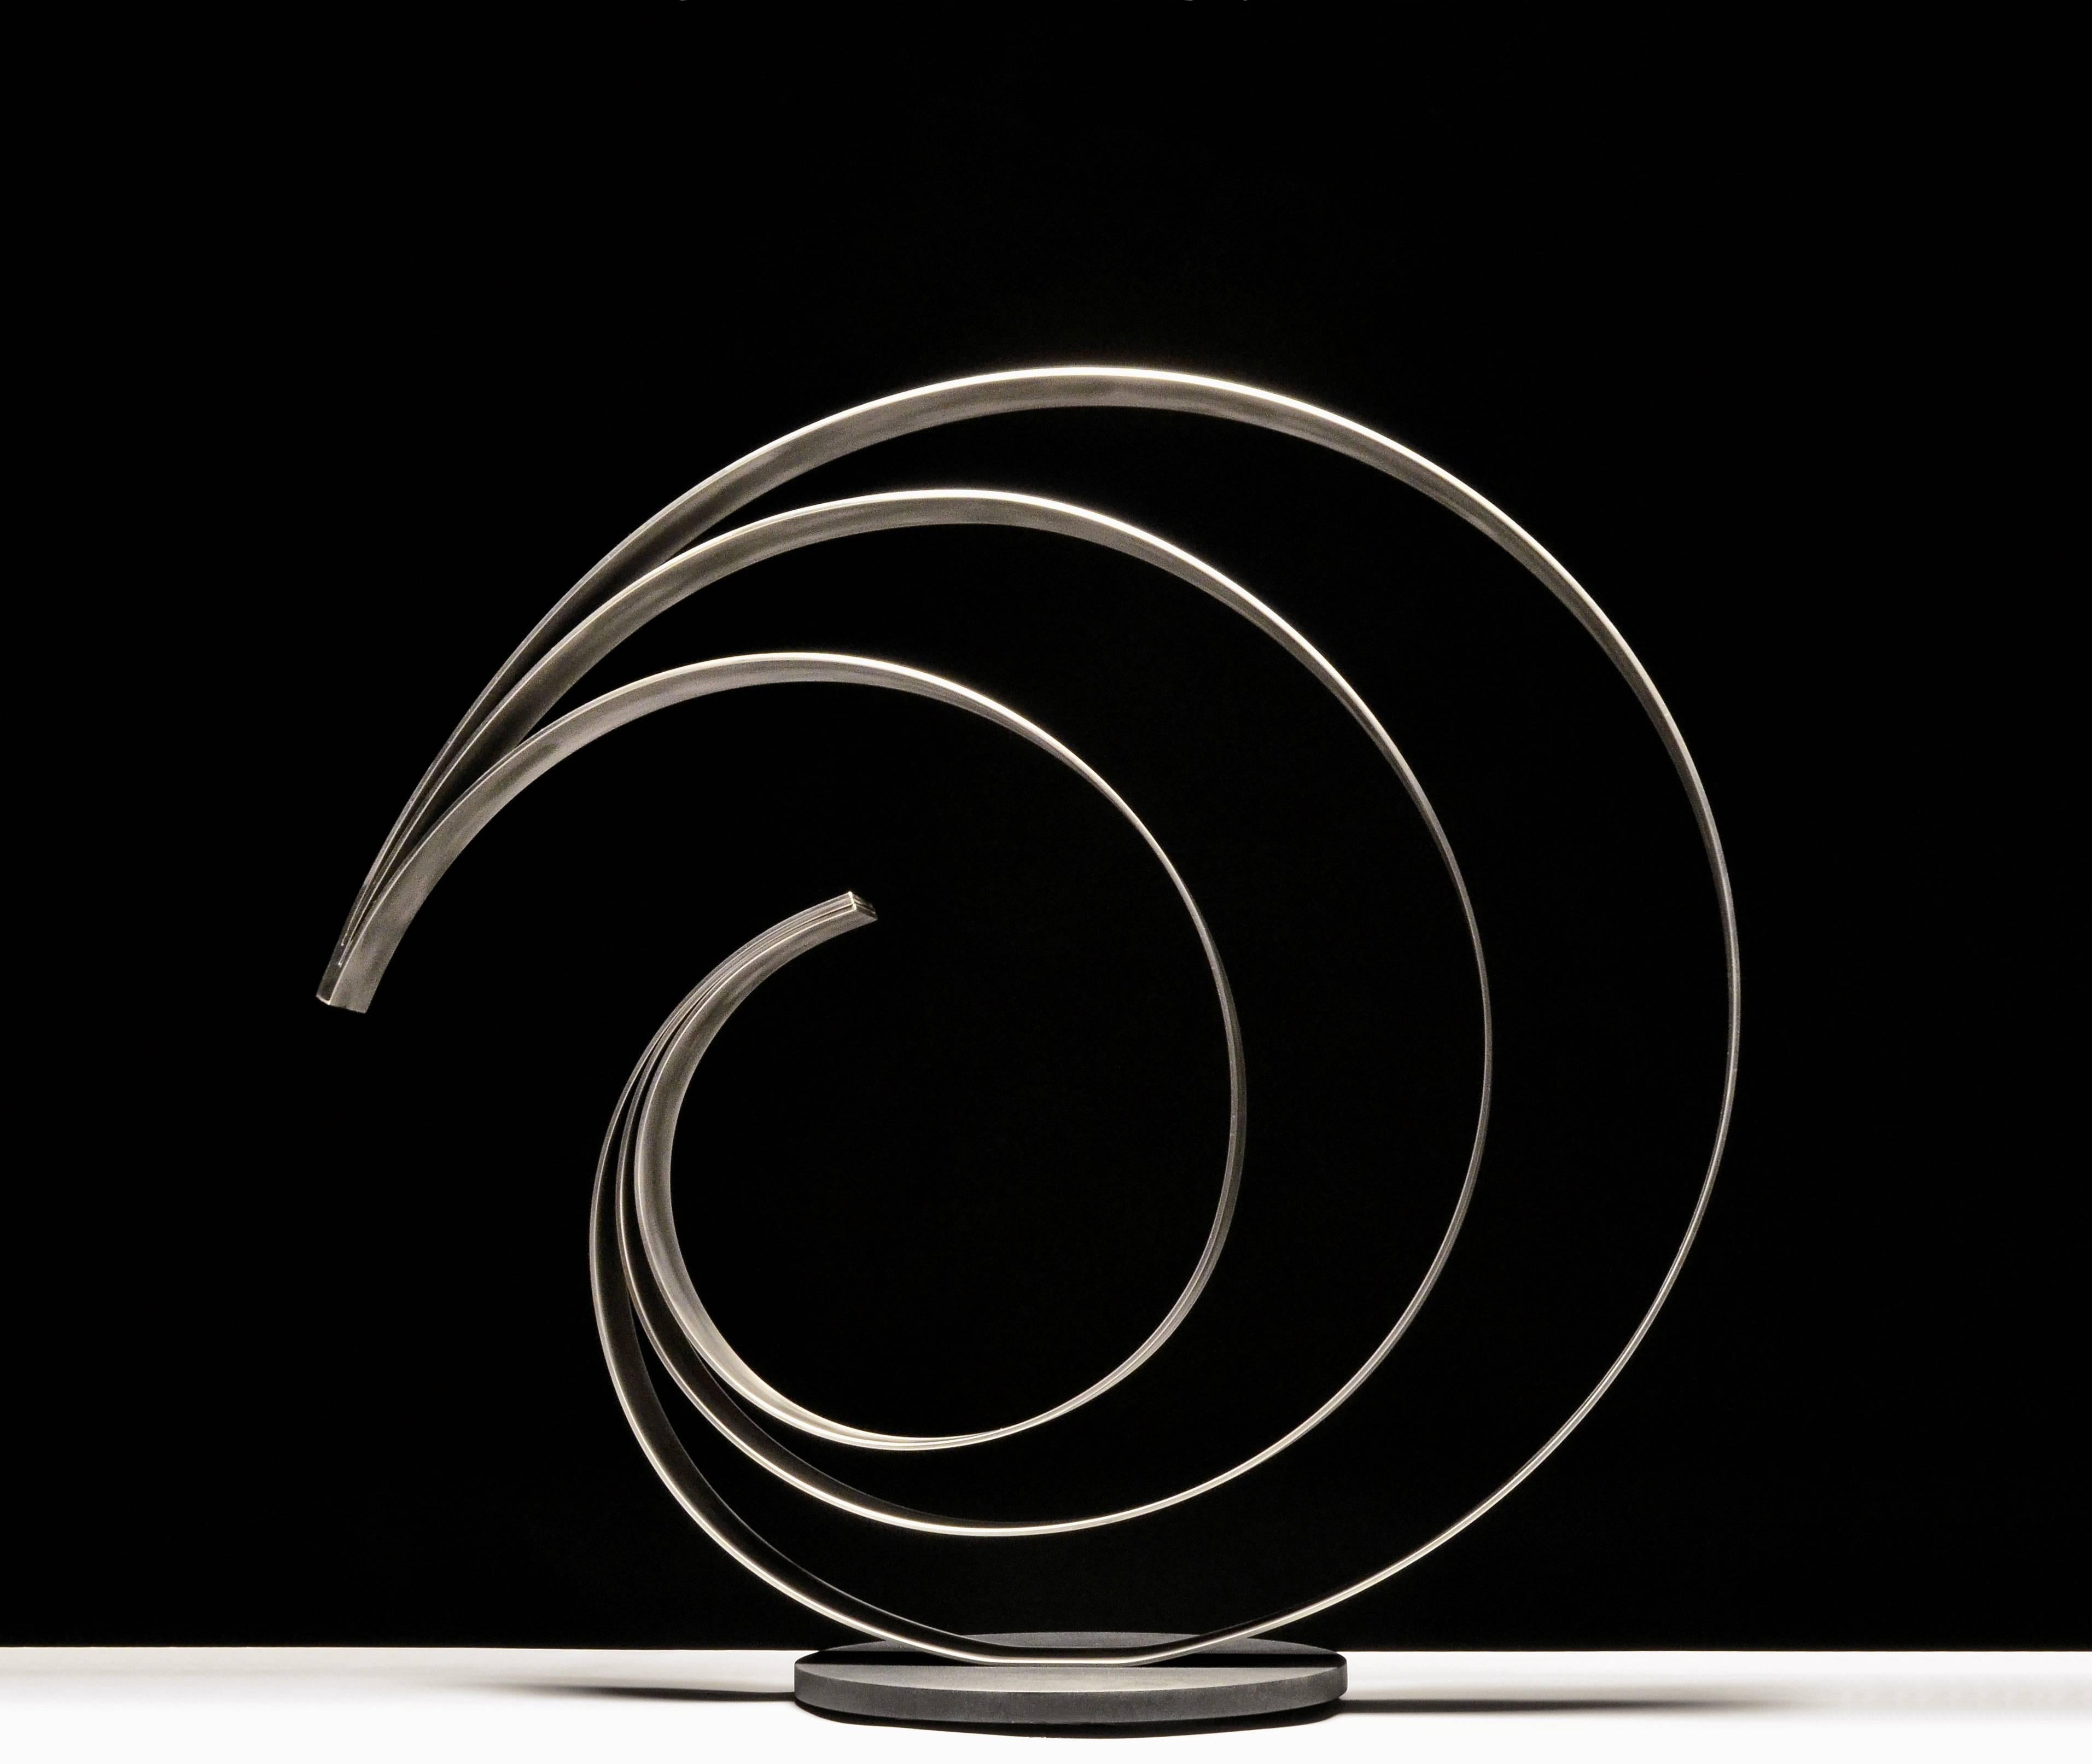 Damon Hyldreth Abstract Sculpture - Knot #74S 1/12